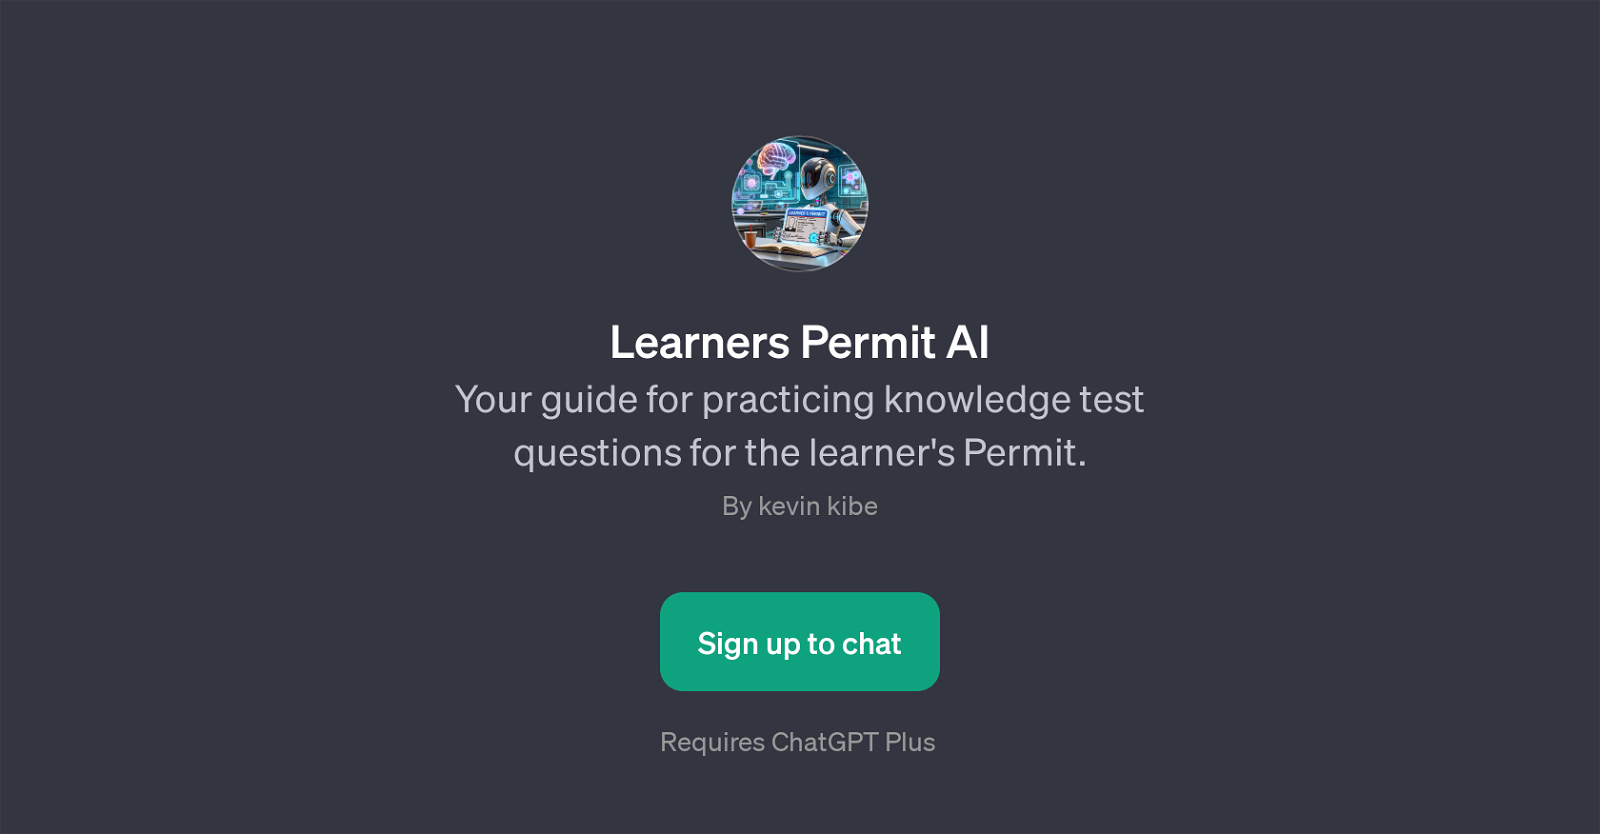 Learners Permit AI website